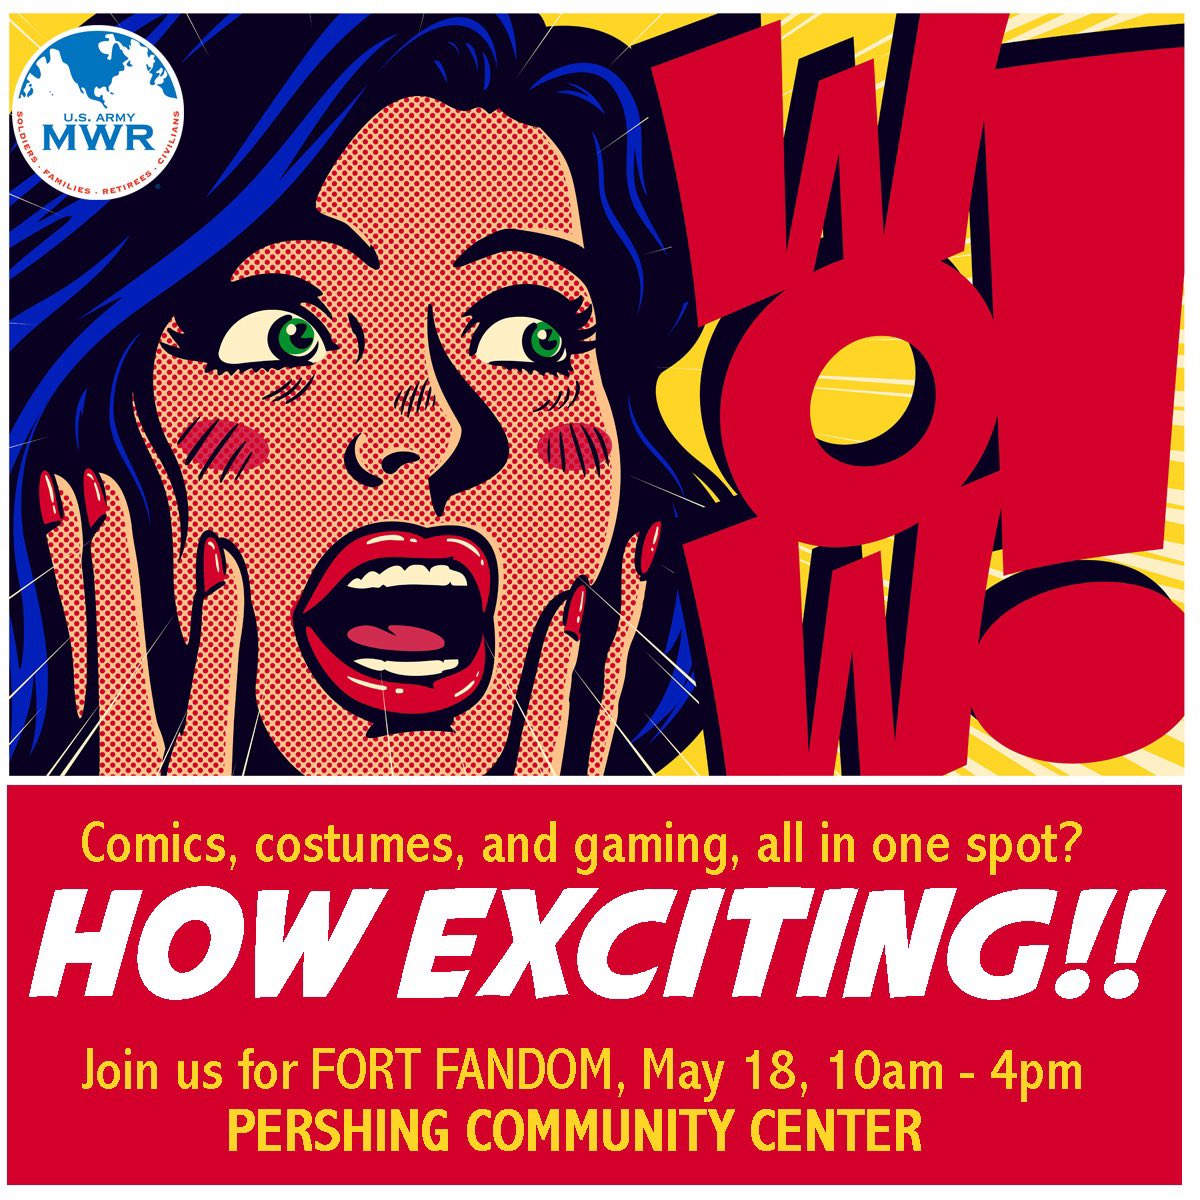 💥 HOW EXCITING!! 💥 Mark your calendars for Fort Fandom on 18 May. Don't miss this celebration of your favorite fandoms with special guest appearances, comics, gaming, a cosplay contest, & more! Find full event details + get your tickets online ⬇️ leonardwood.armymwr.com/calendar/event…